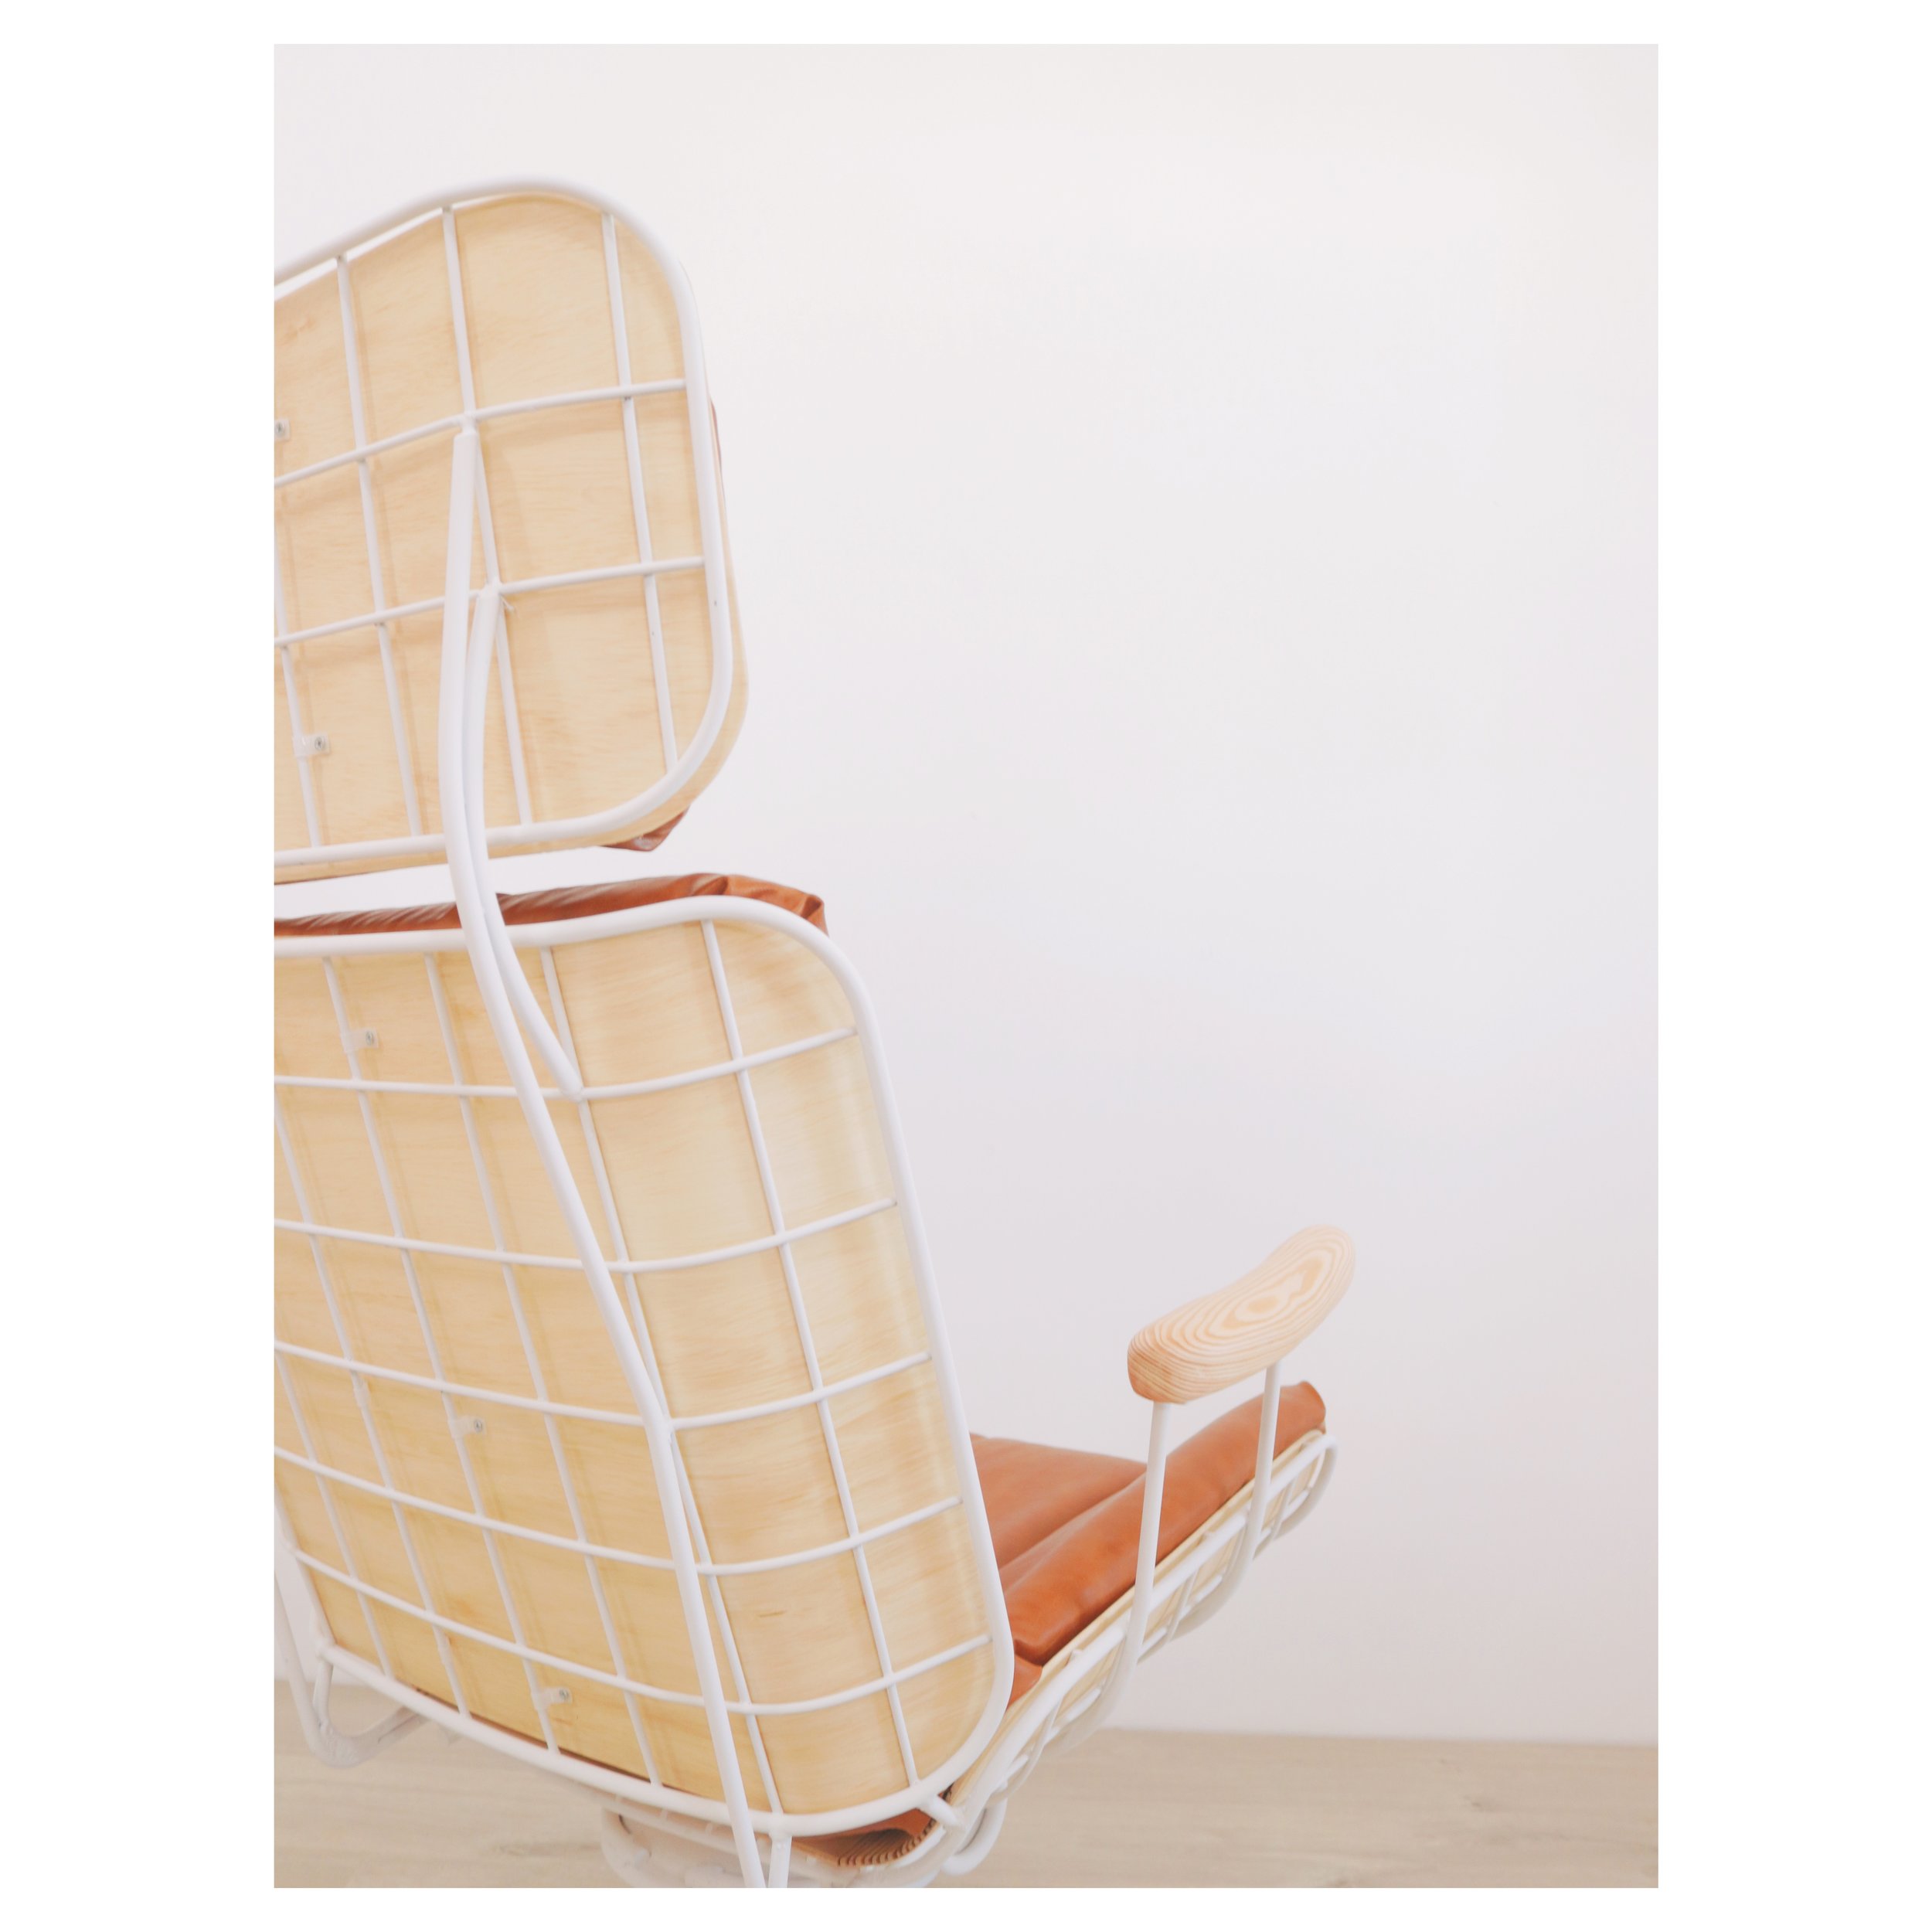  A modern take on a vintage Eames-style outdoor lounge chair.  By:  Mike Montgomery | Modern Builds  